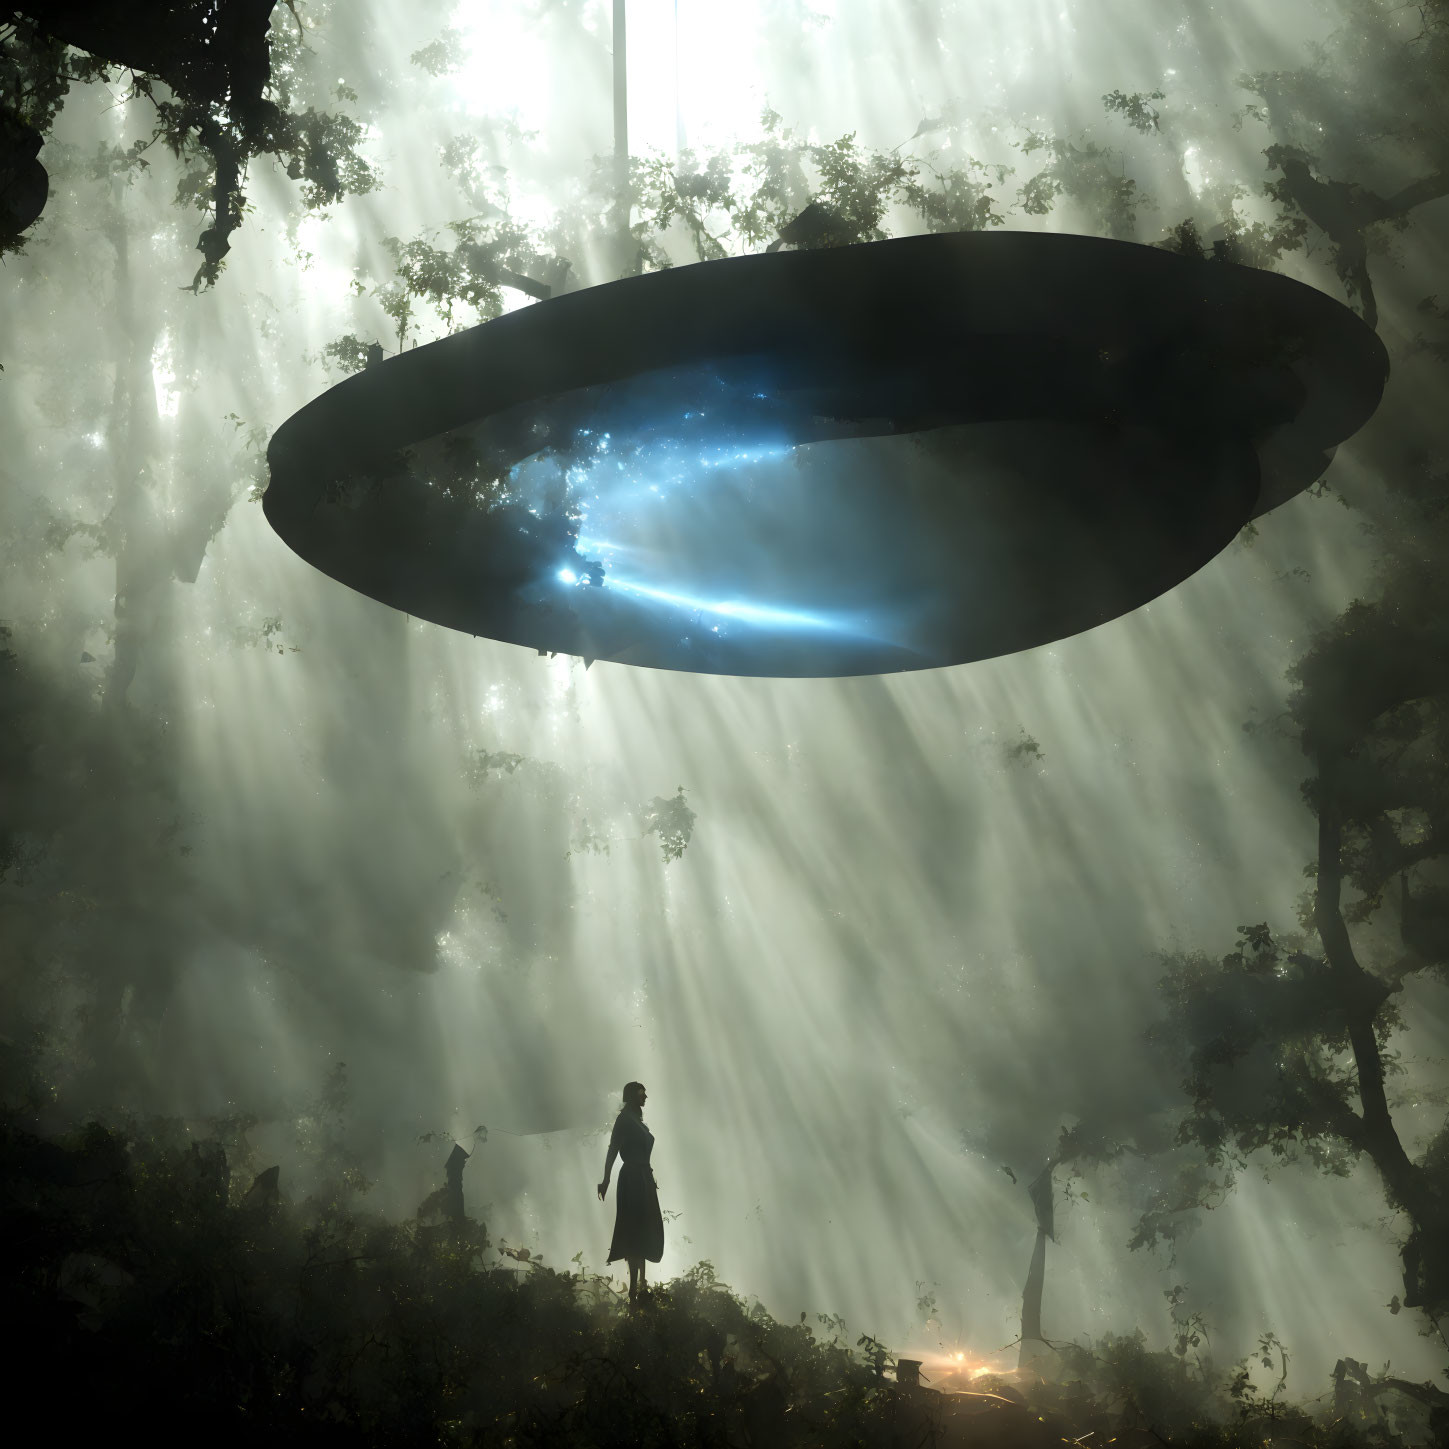 Mysterious UFO in foggy forest with silhouetted figure below